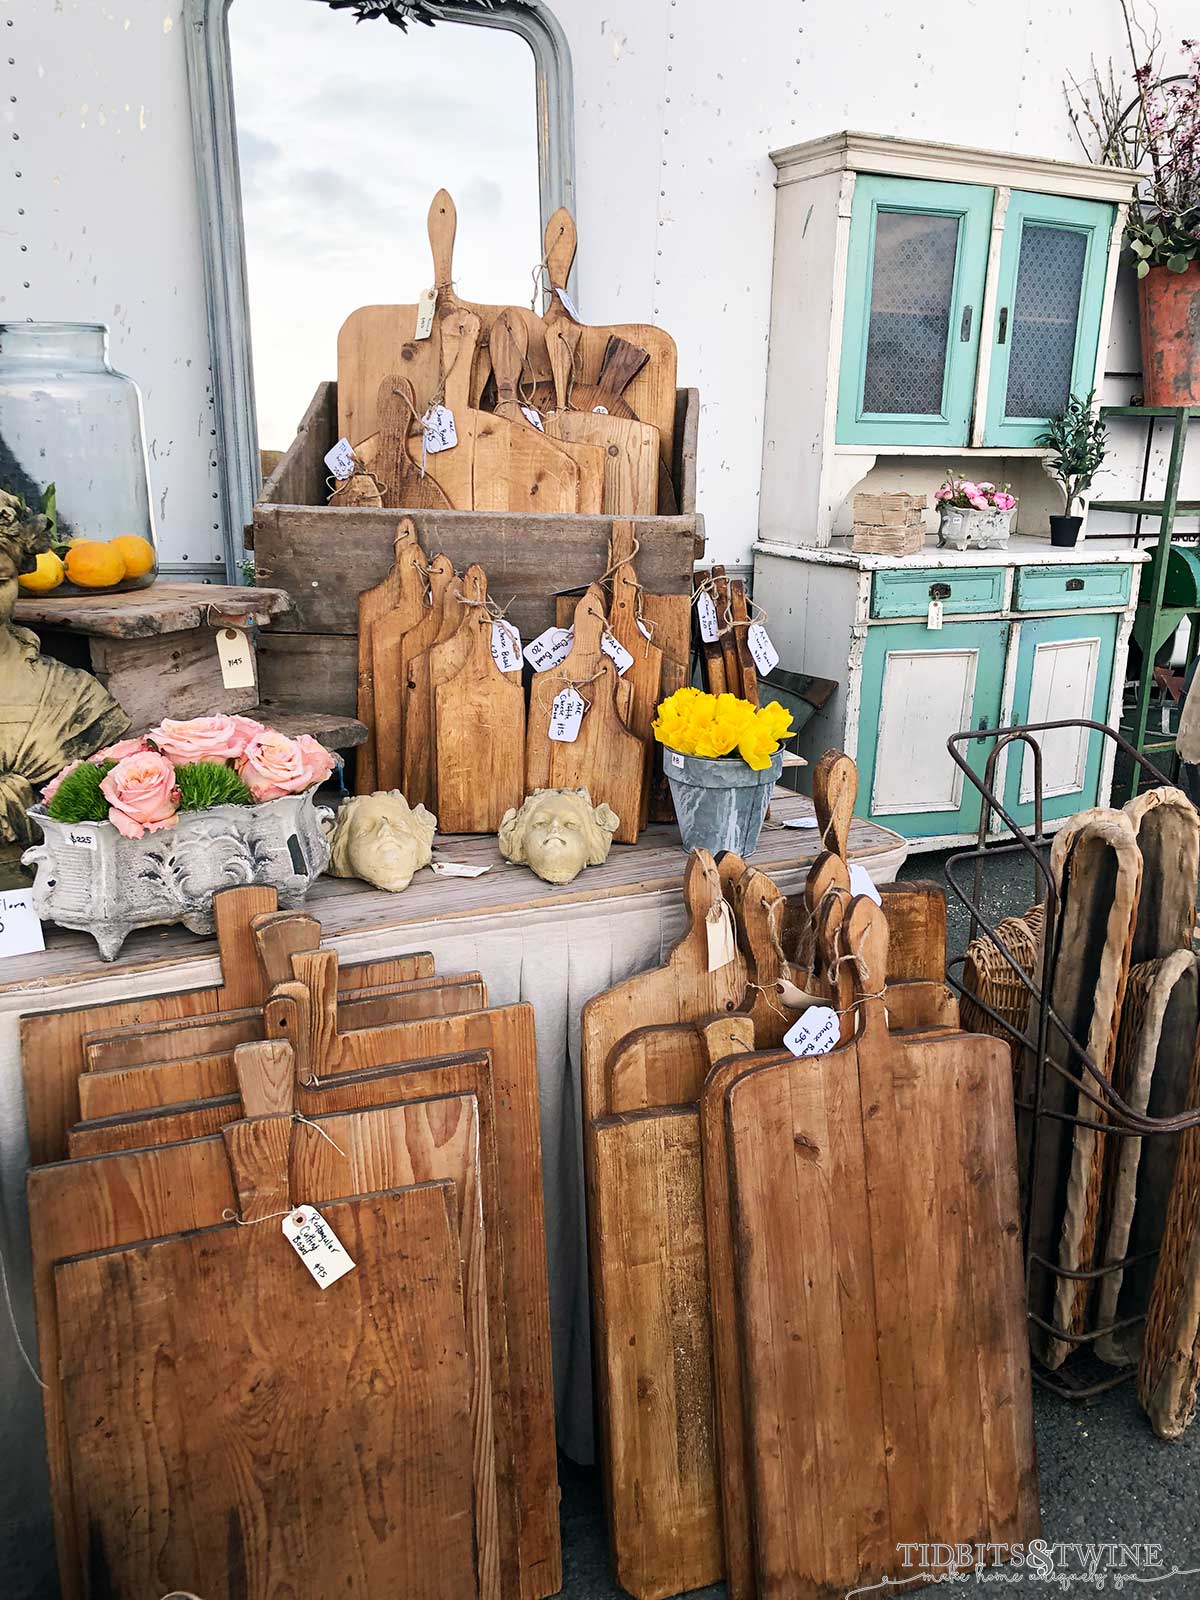 The Best Bay Area Antique Stores for European Finds